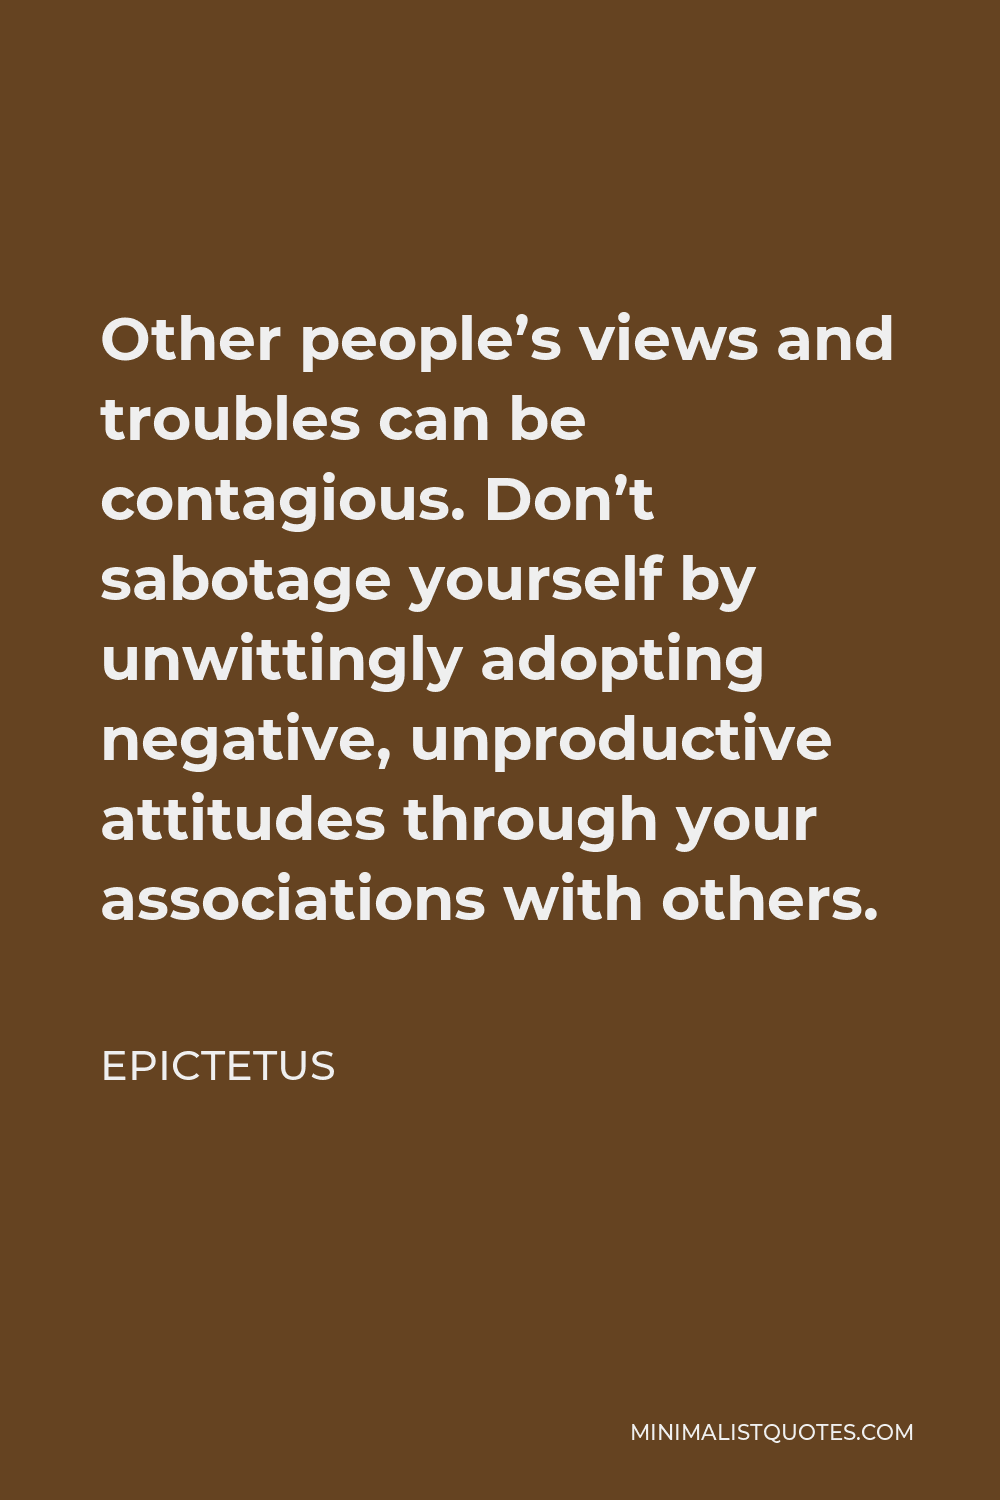 Epictetus Quote - Other people’s views and troubles can be contagious. Don’t sabotage yourself by unwittingly adopting negative, unproductive attitudes through your associations with others.